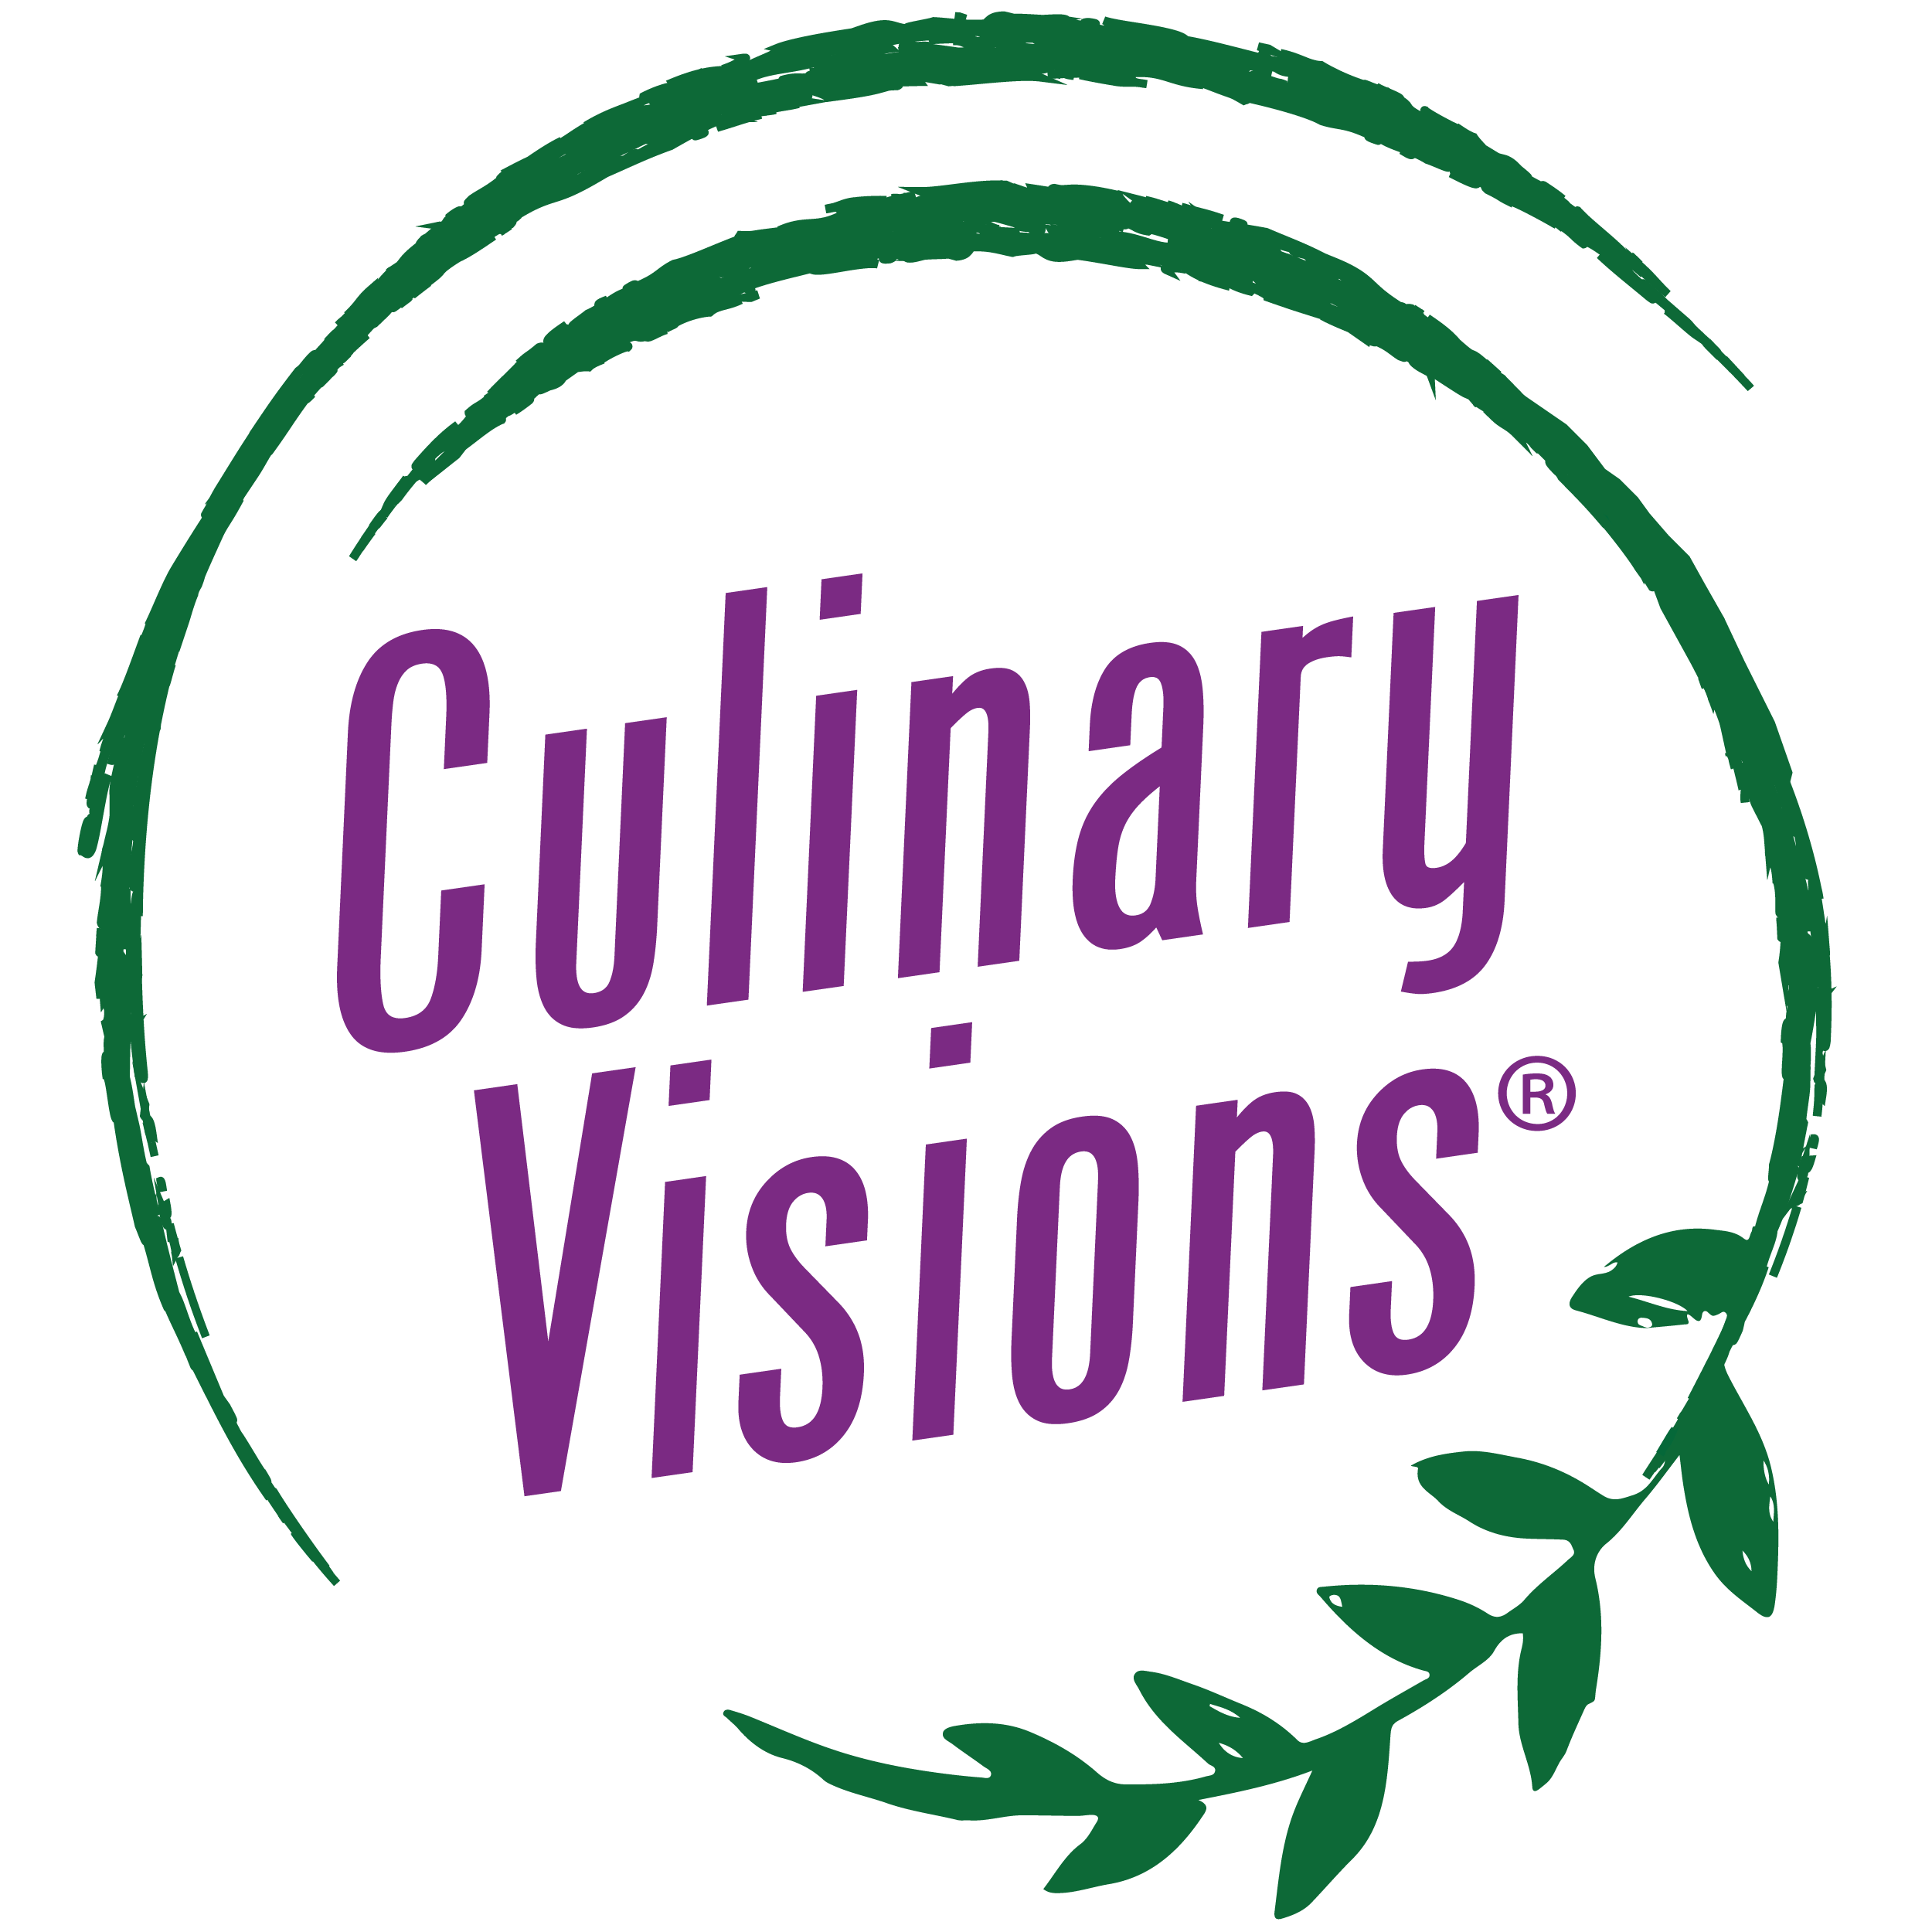 Culinary Visions Panel  Chicago Food-focused Consumer Research